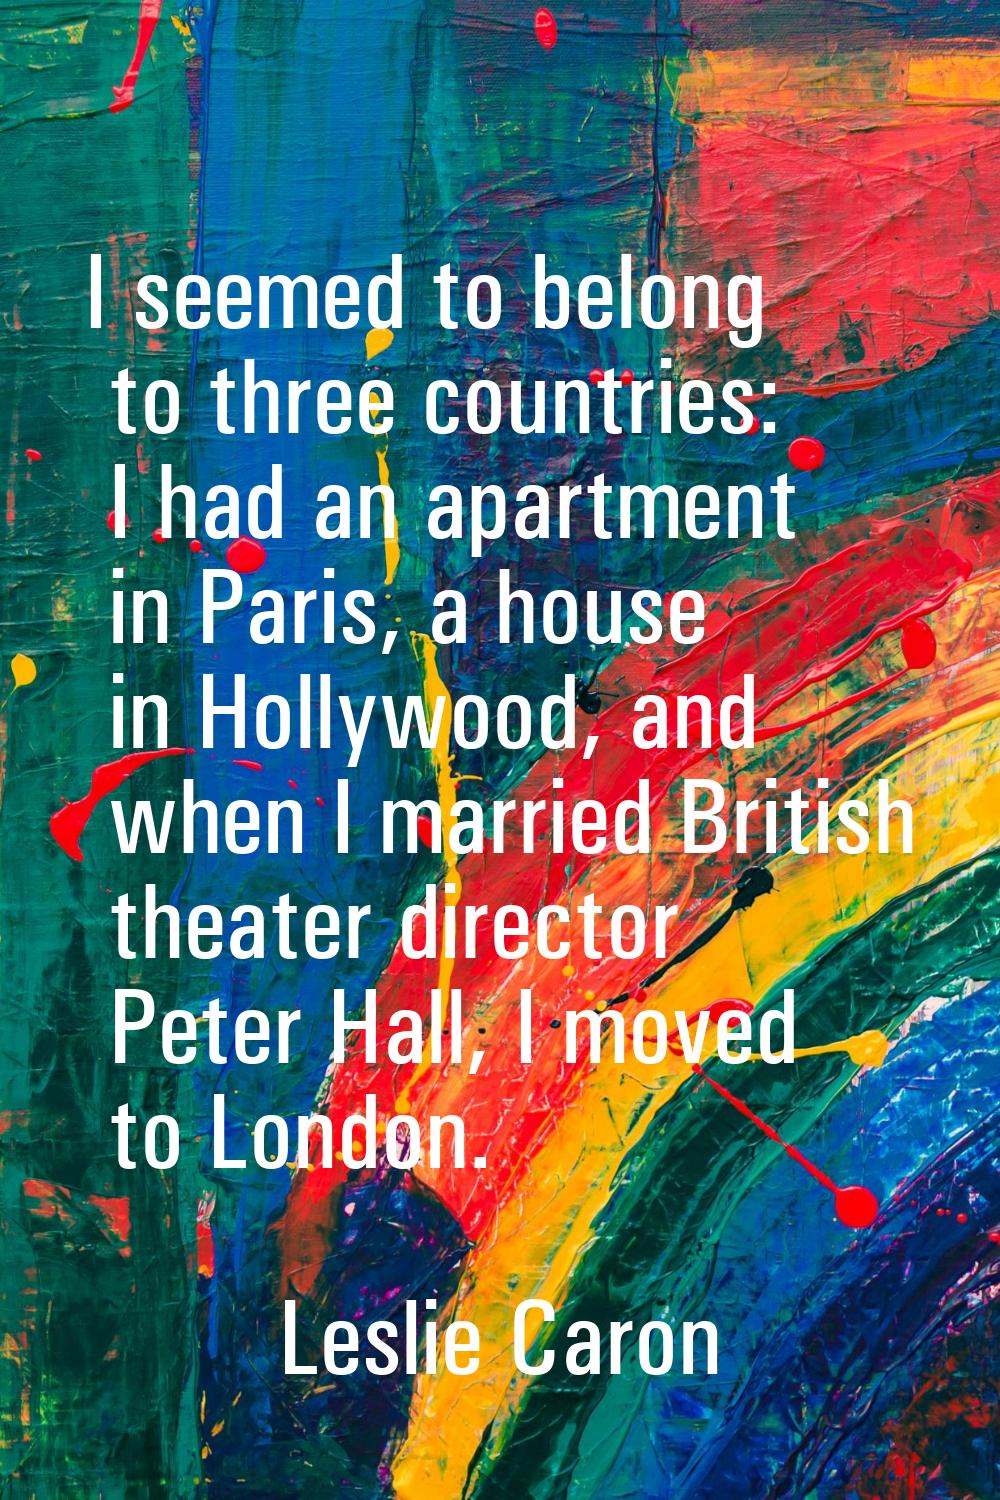 I seemed to belong to three countries: I had an apartment in Paris, a house in Hollywood, and when 